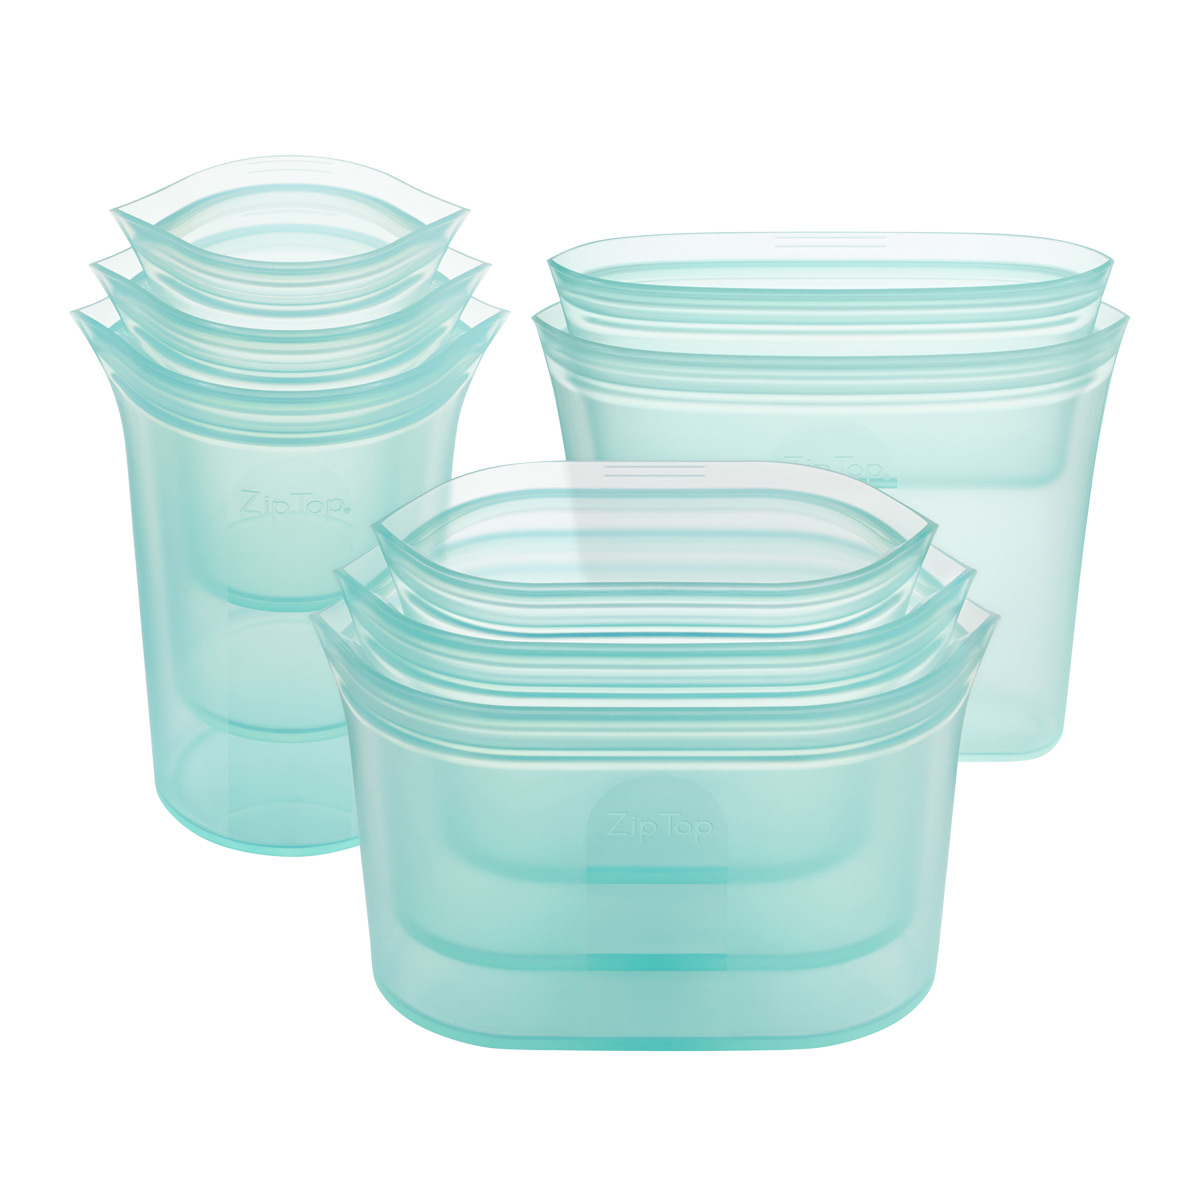 https://www.containerstore.com/catalogimages/435939/10083215-Teal_8PcSet-VEN.jpg